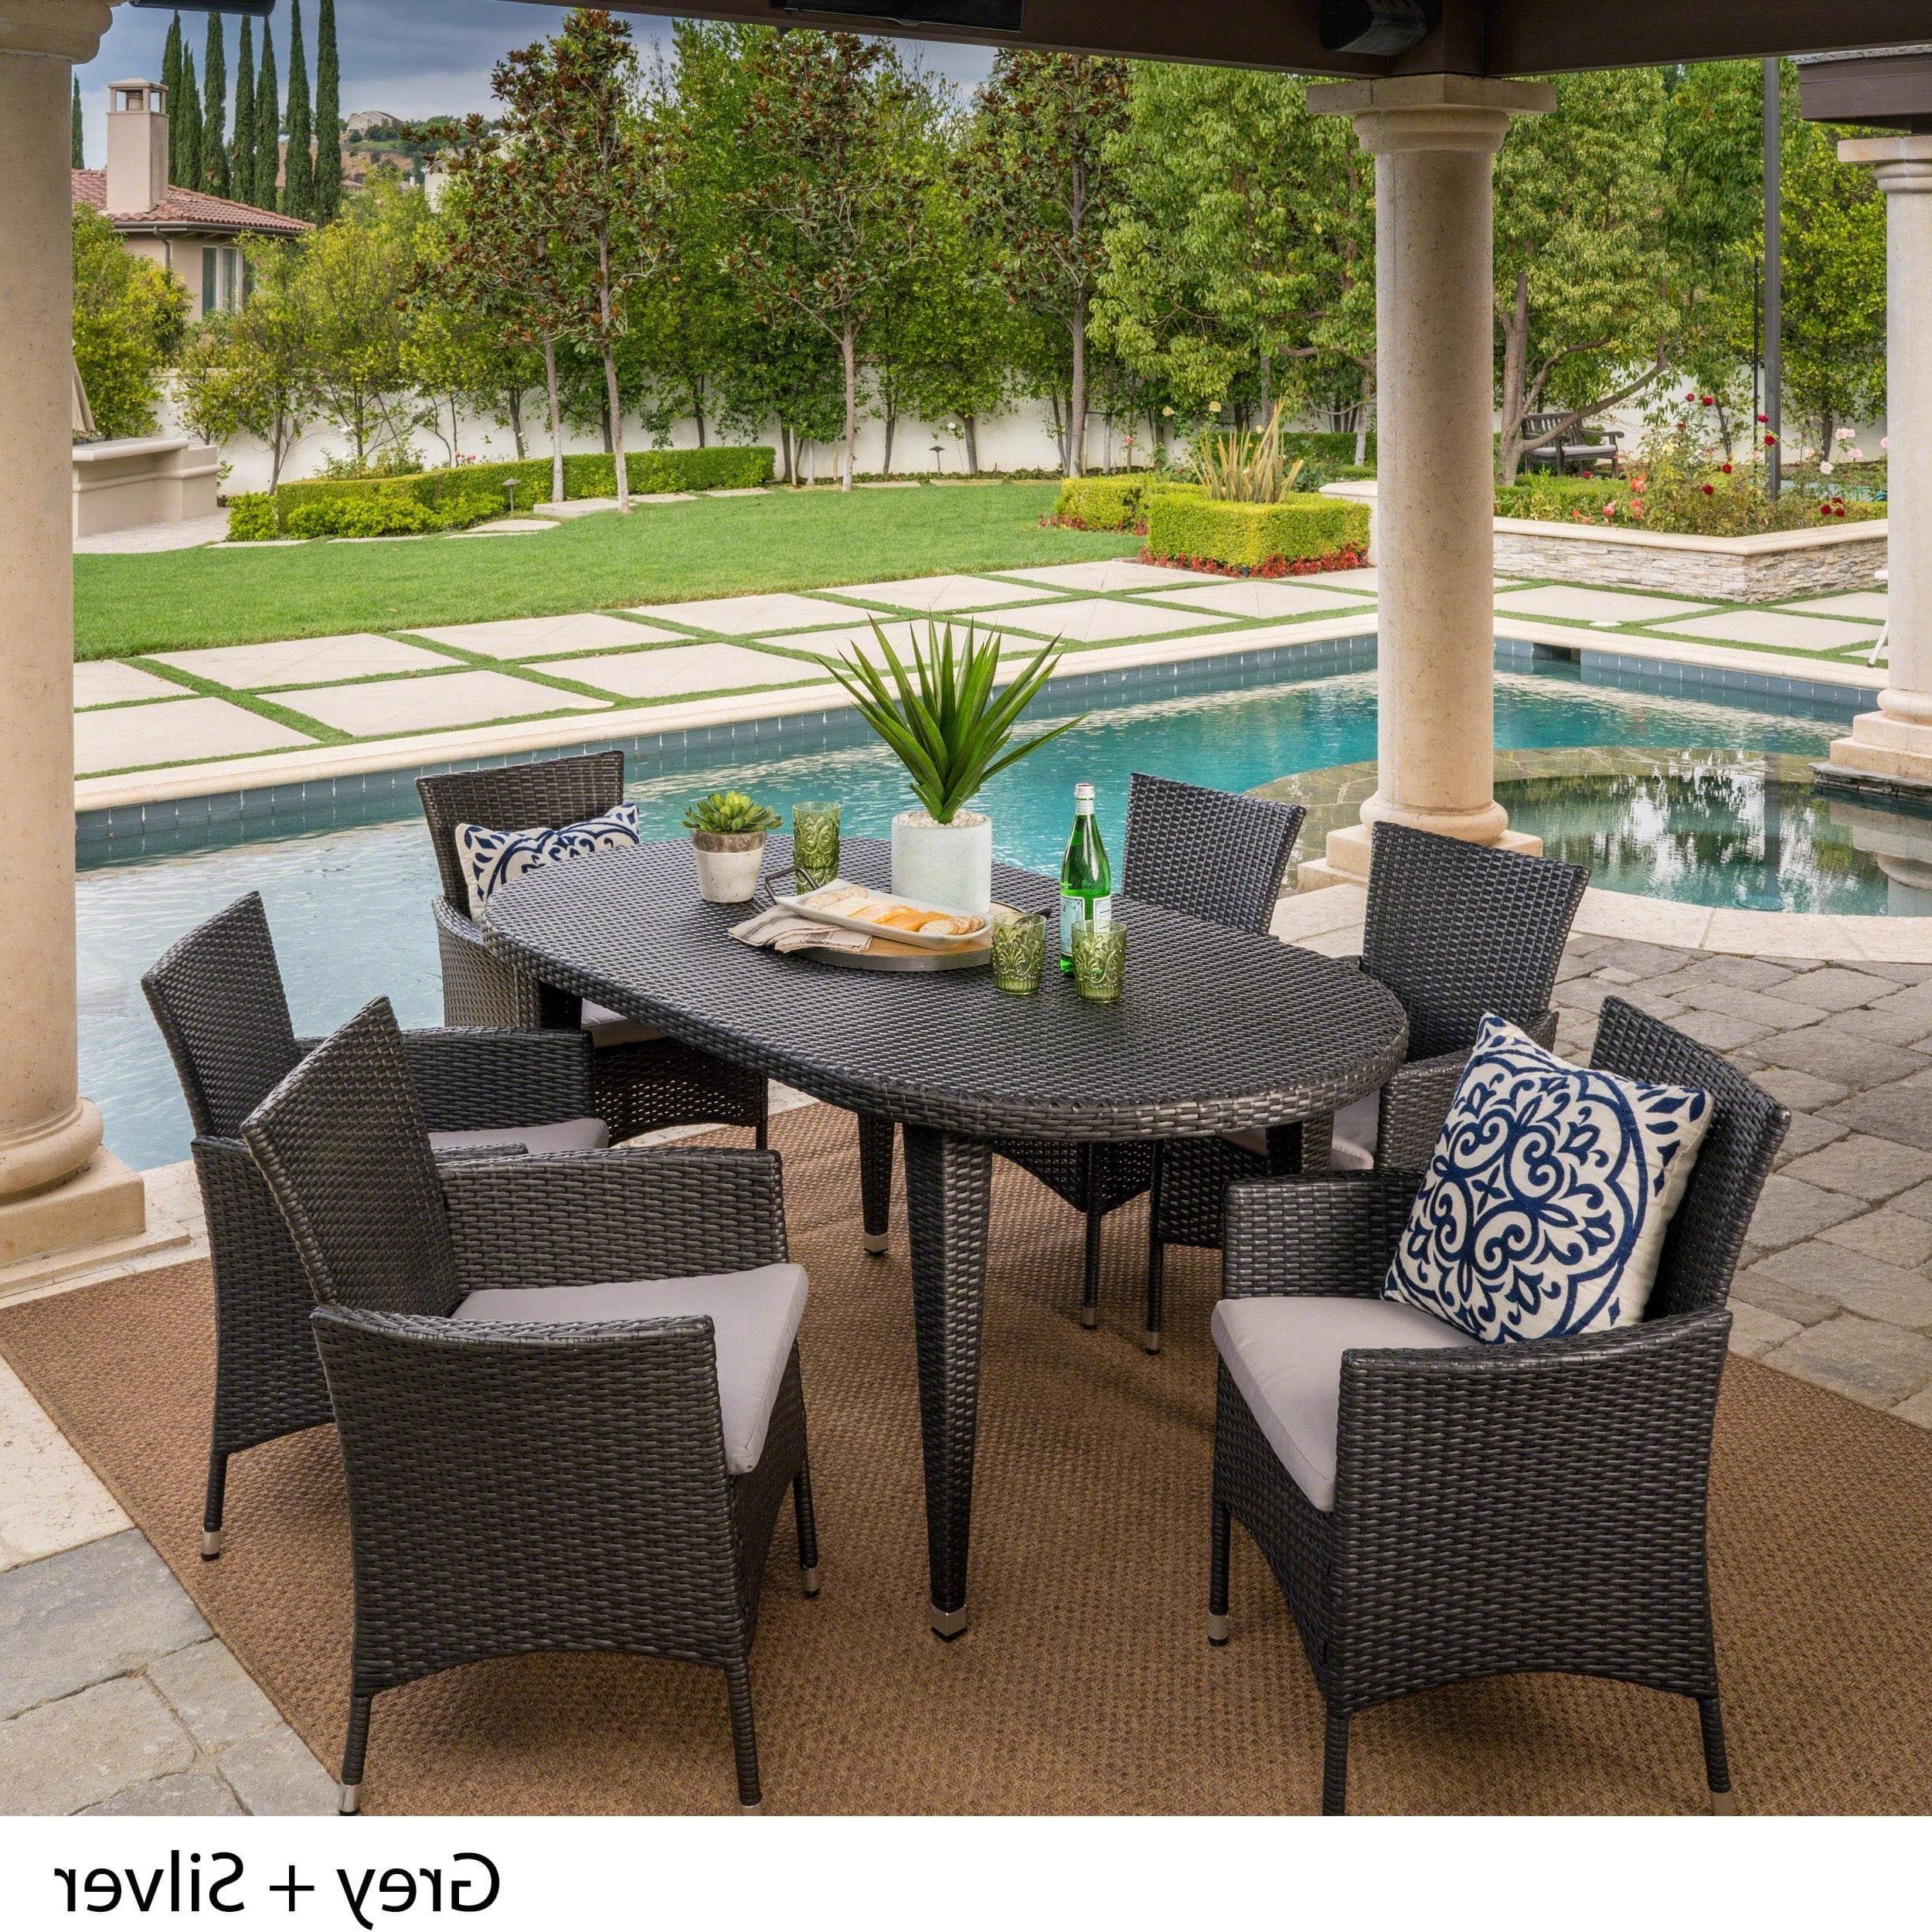 7 Piece Large Patio Dining Sets With Well Liked Vincent Outdoor 7 Piece Oval Wicker Dining Set With Cushions (View 2 of 15)